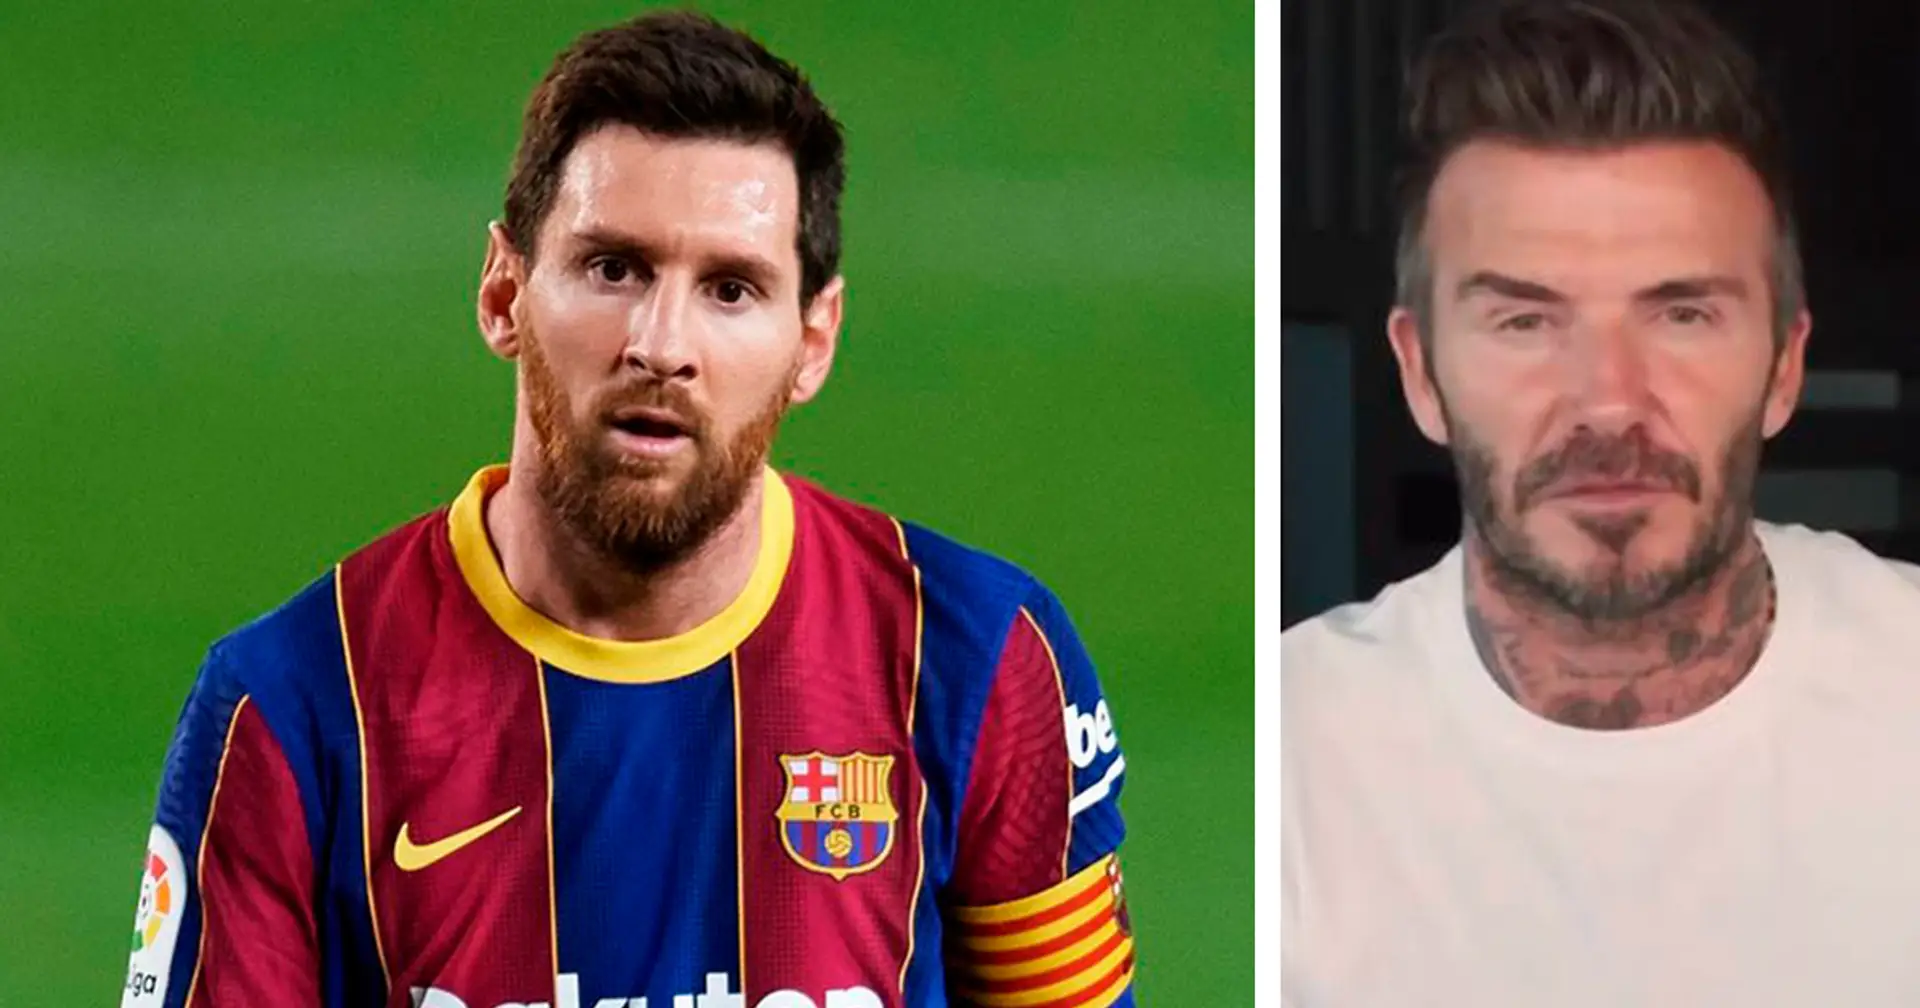 'We want to attract the best players': David Beckham on Messi-to-Miami rumours